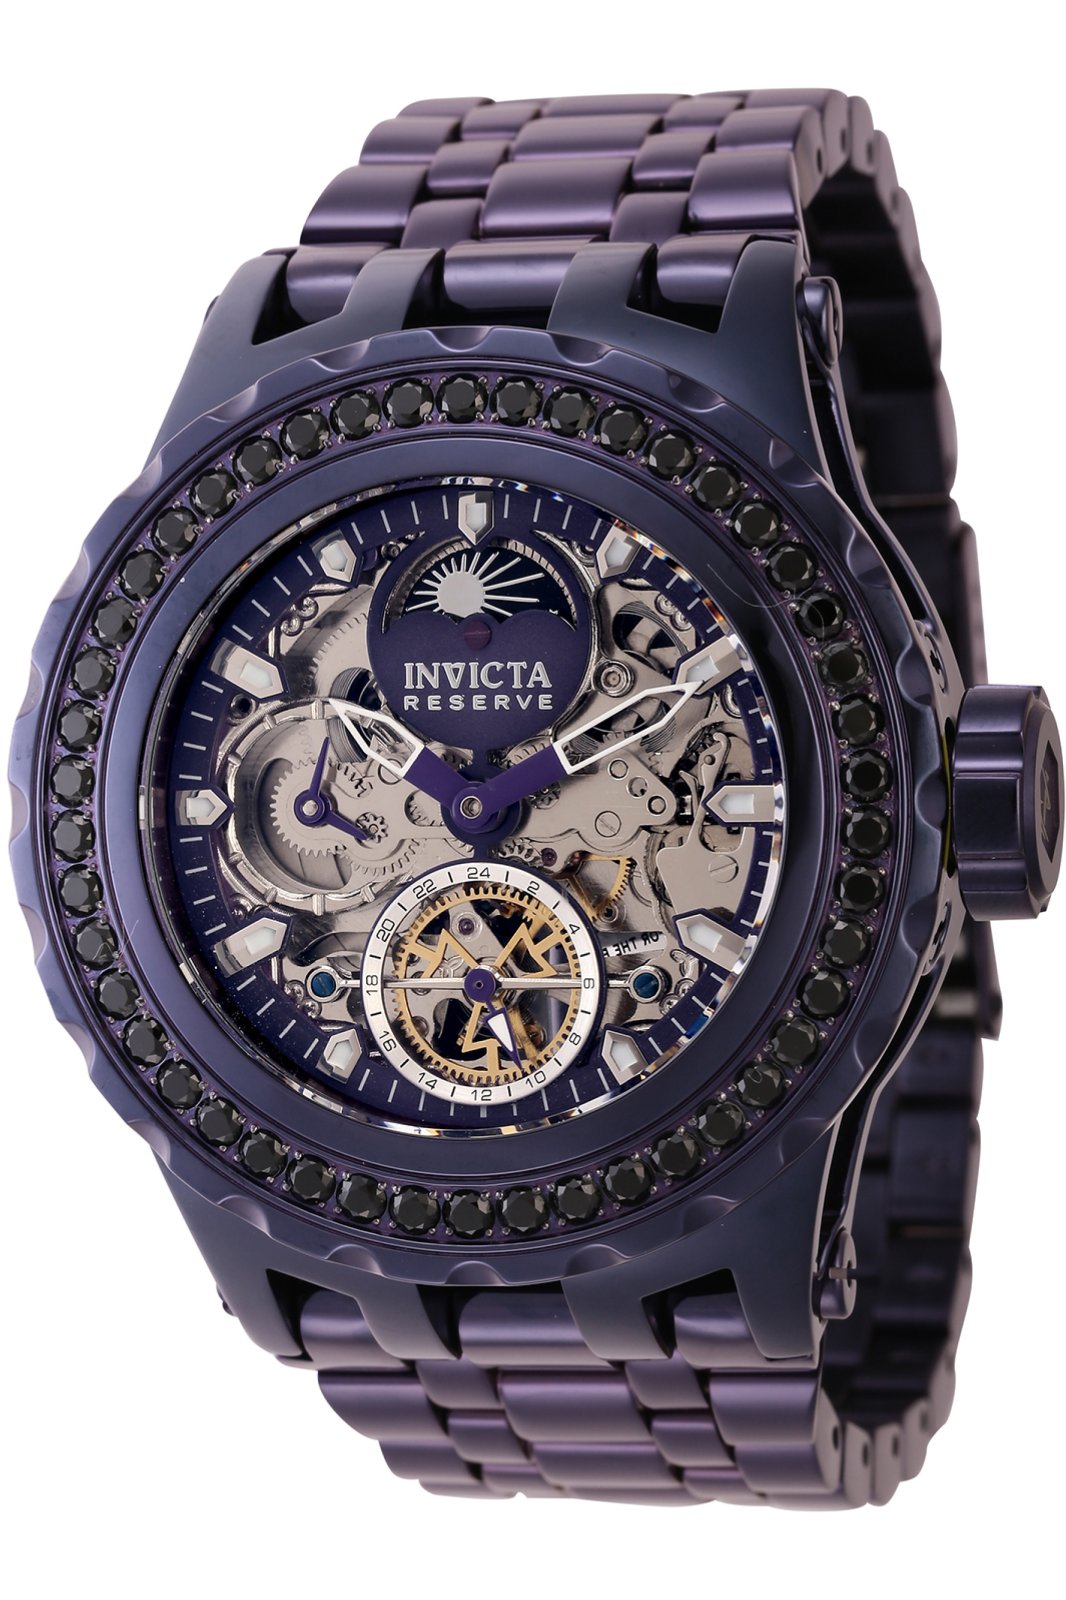 Invicta Reserve - Specialty 43905 Men's Automatic Watch - 52mm